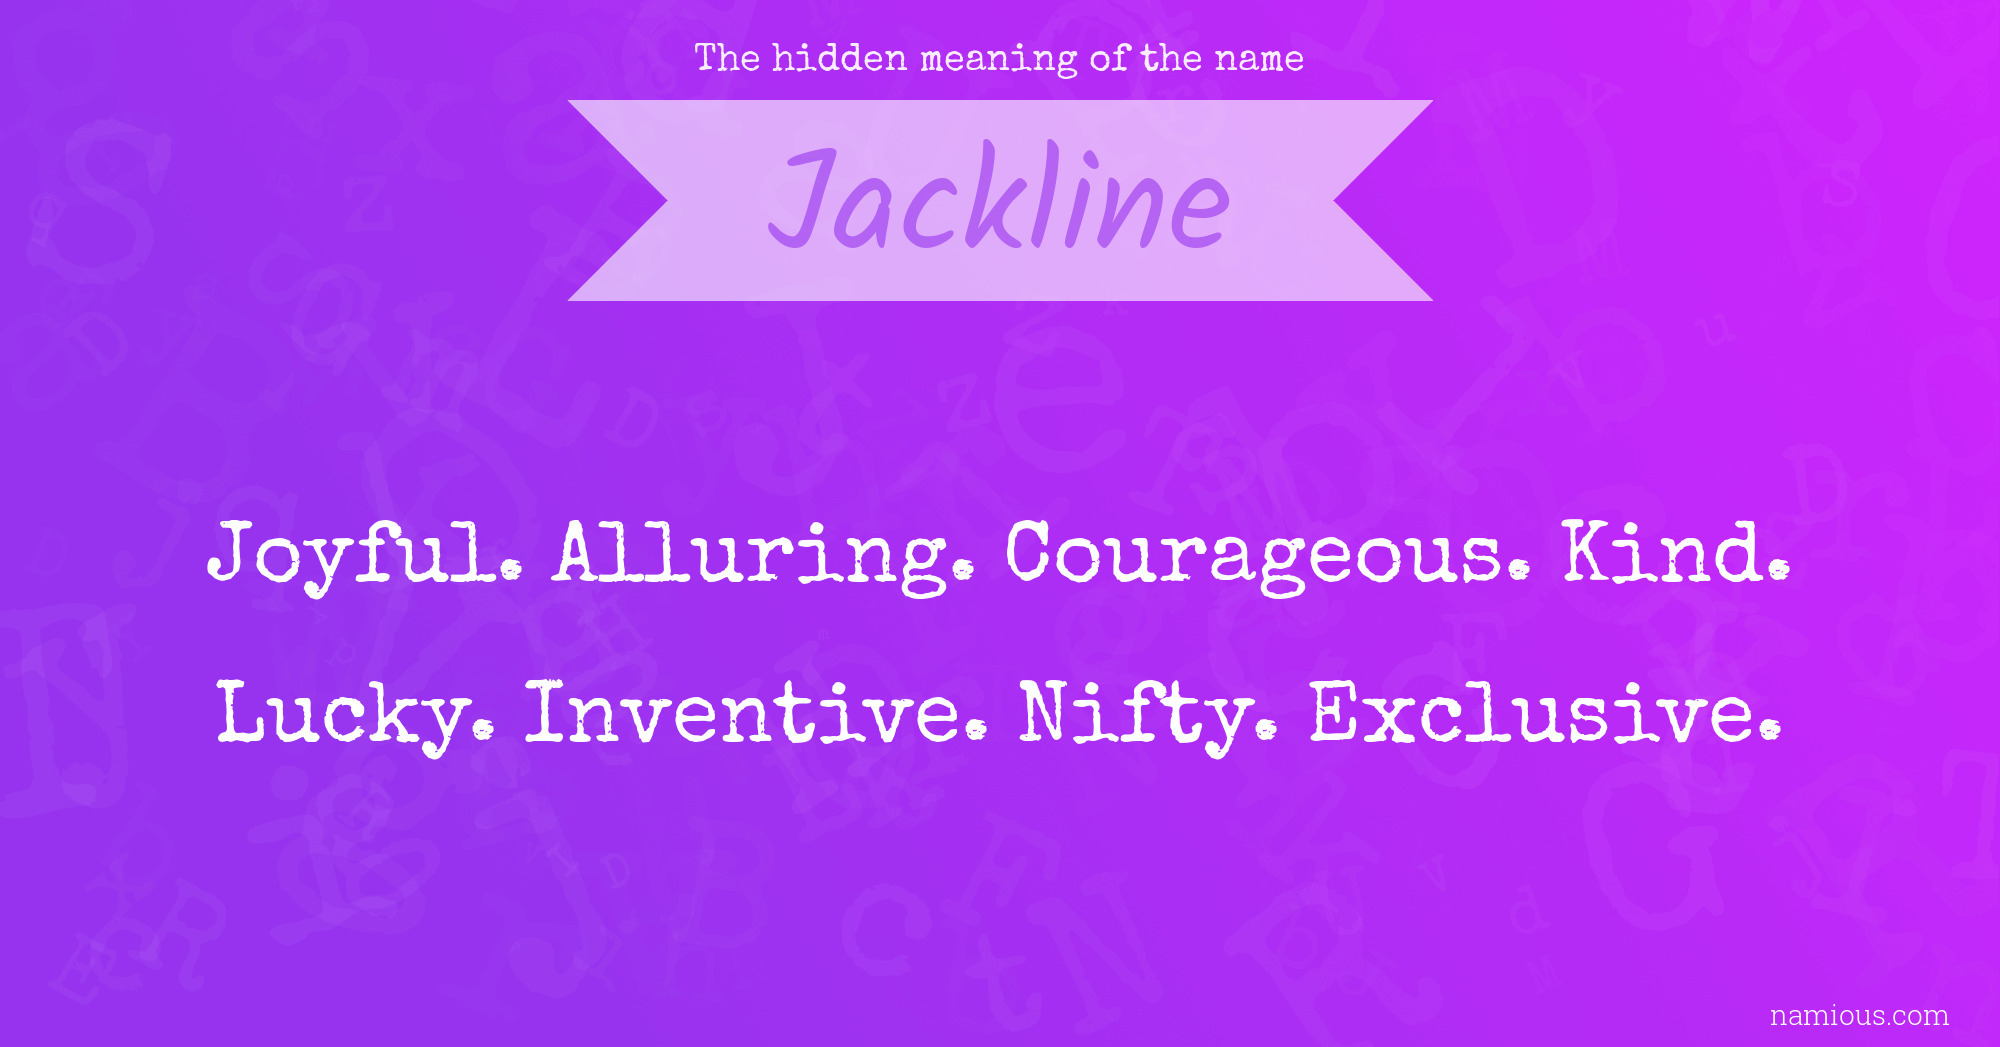 The hidden meaning of the name Jackline